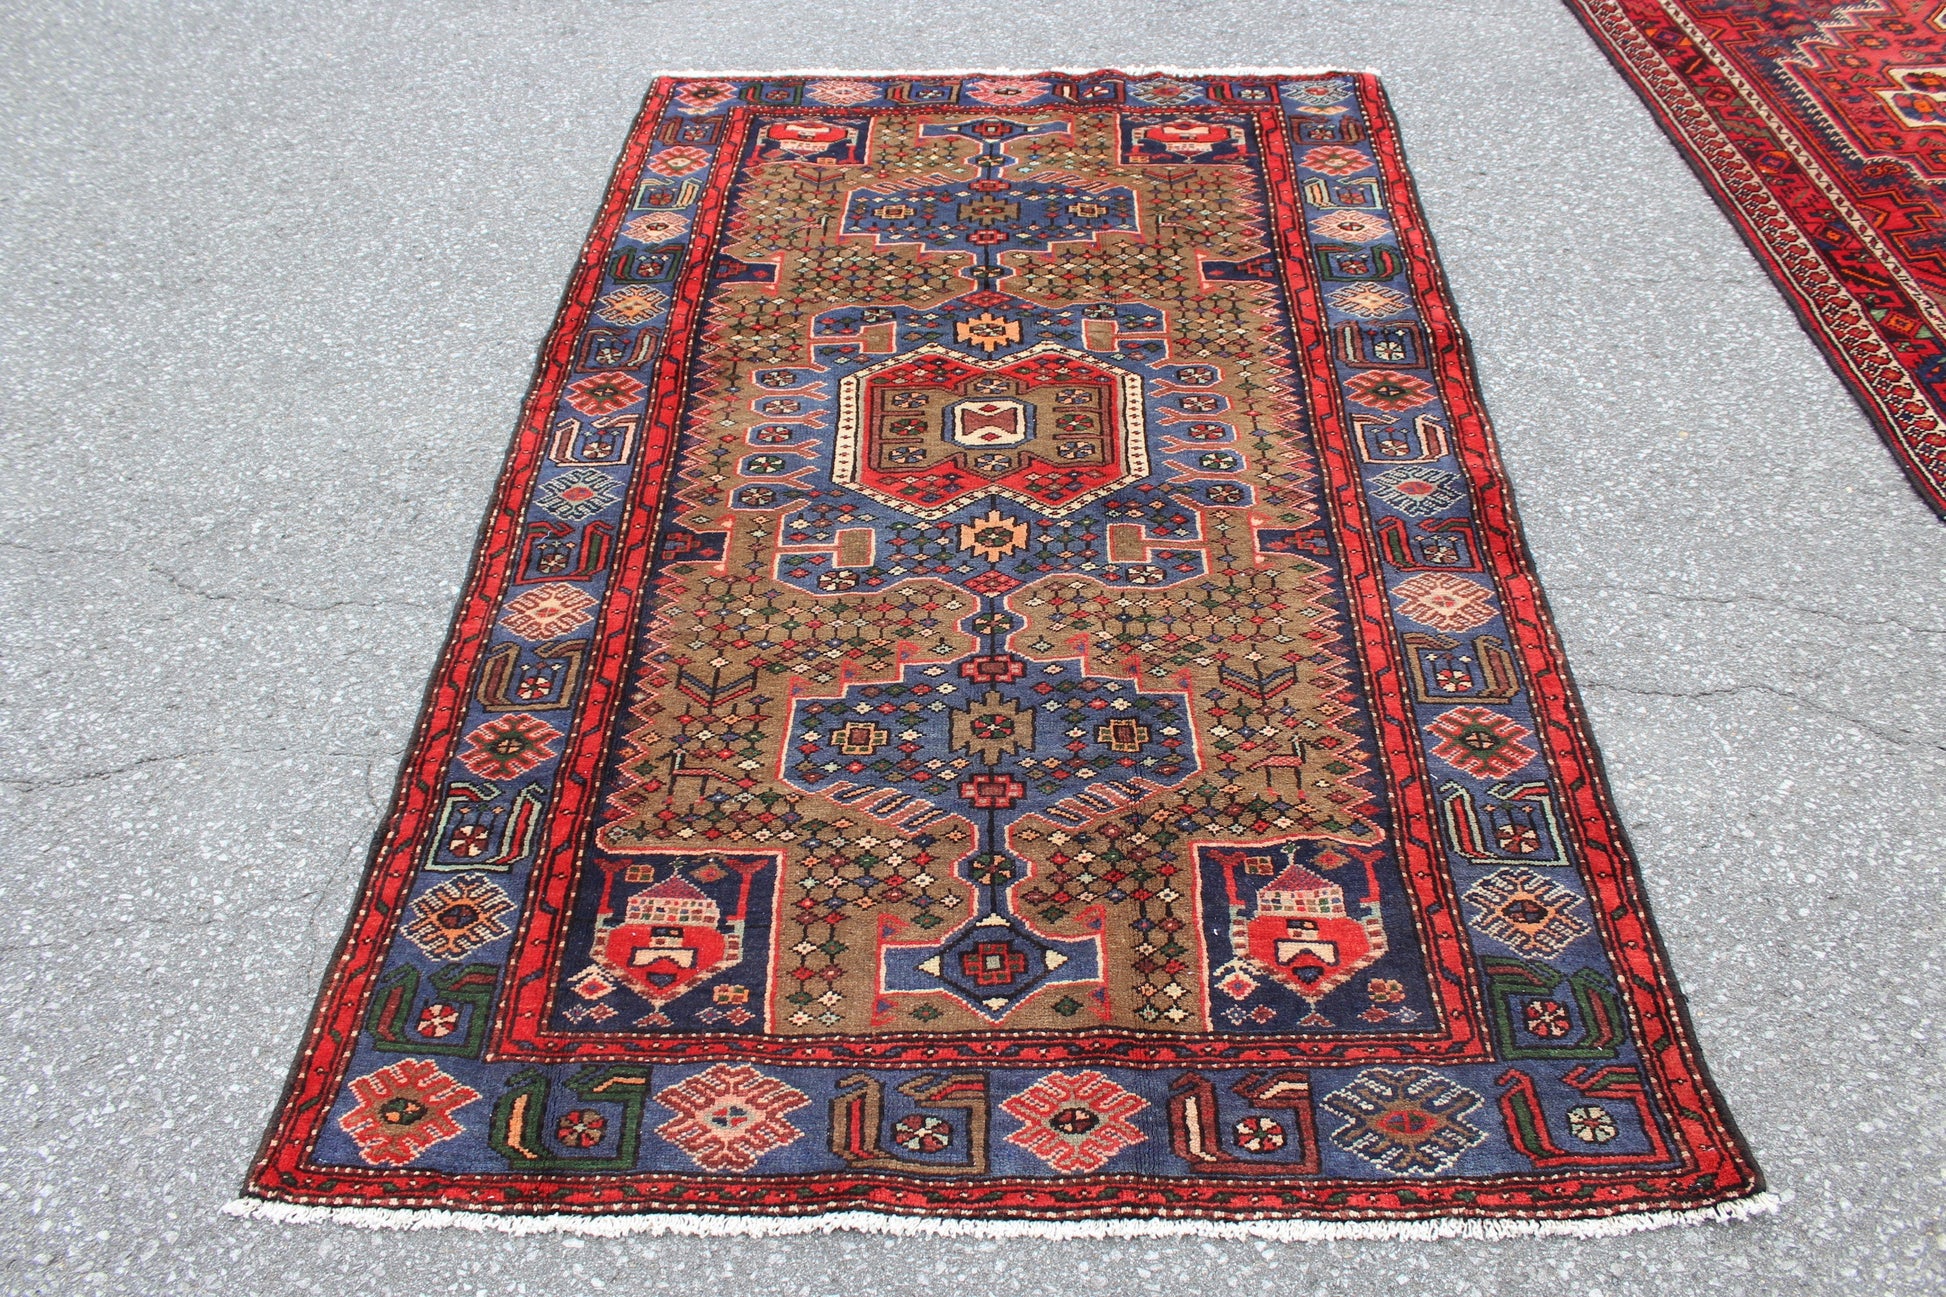 Beige Rug 4x7 with Blue Pink Red Accent | Tribal Handmade Wool